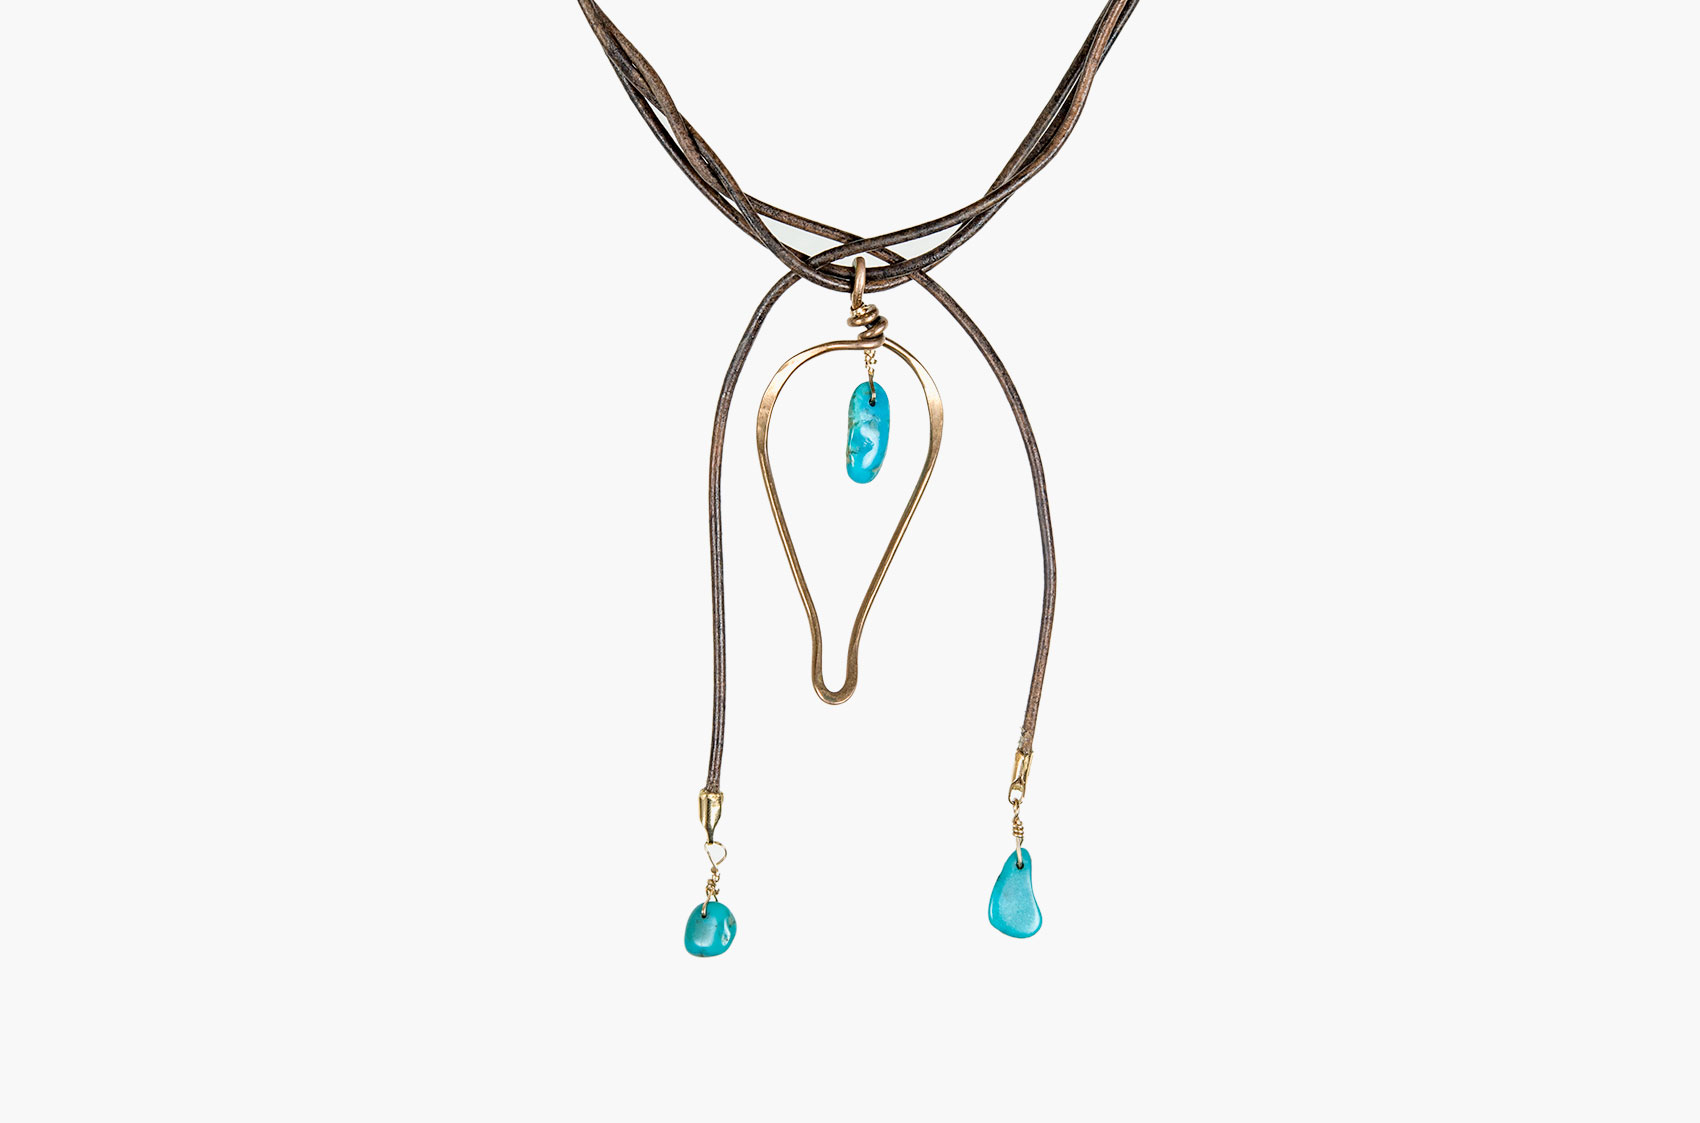 The Tear - Leather Wrap Metro Boho Necklace Gold